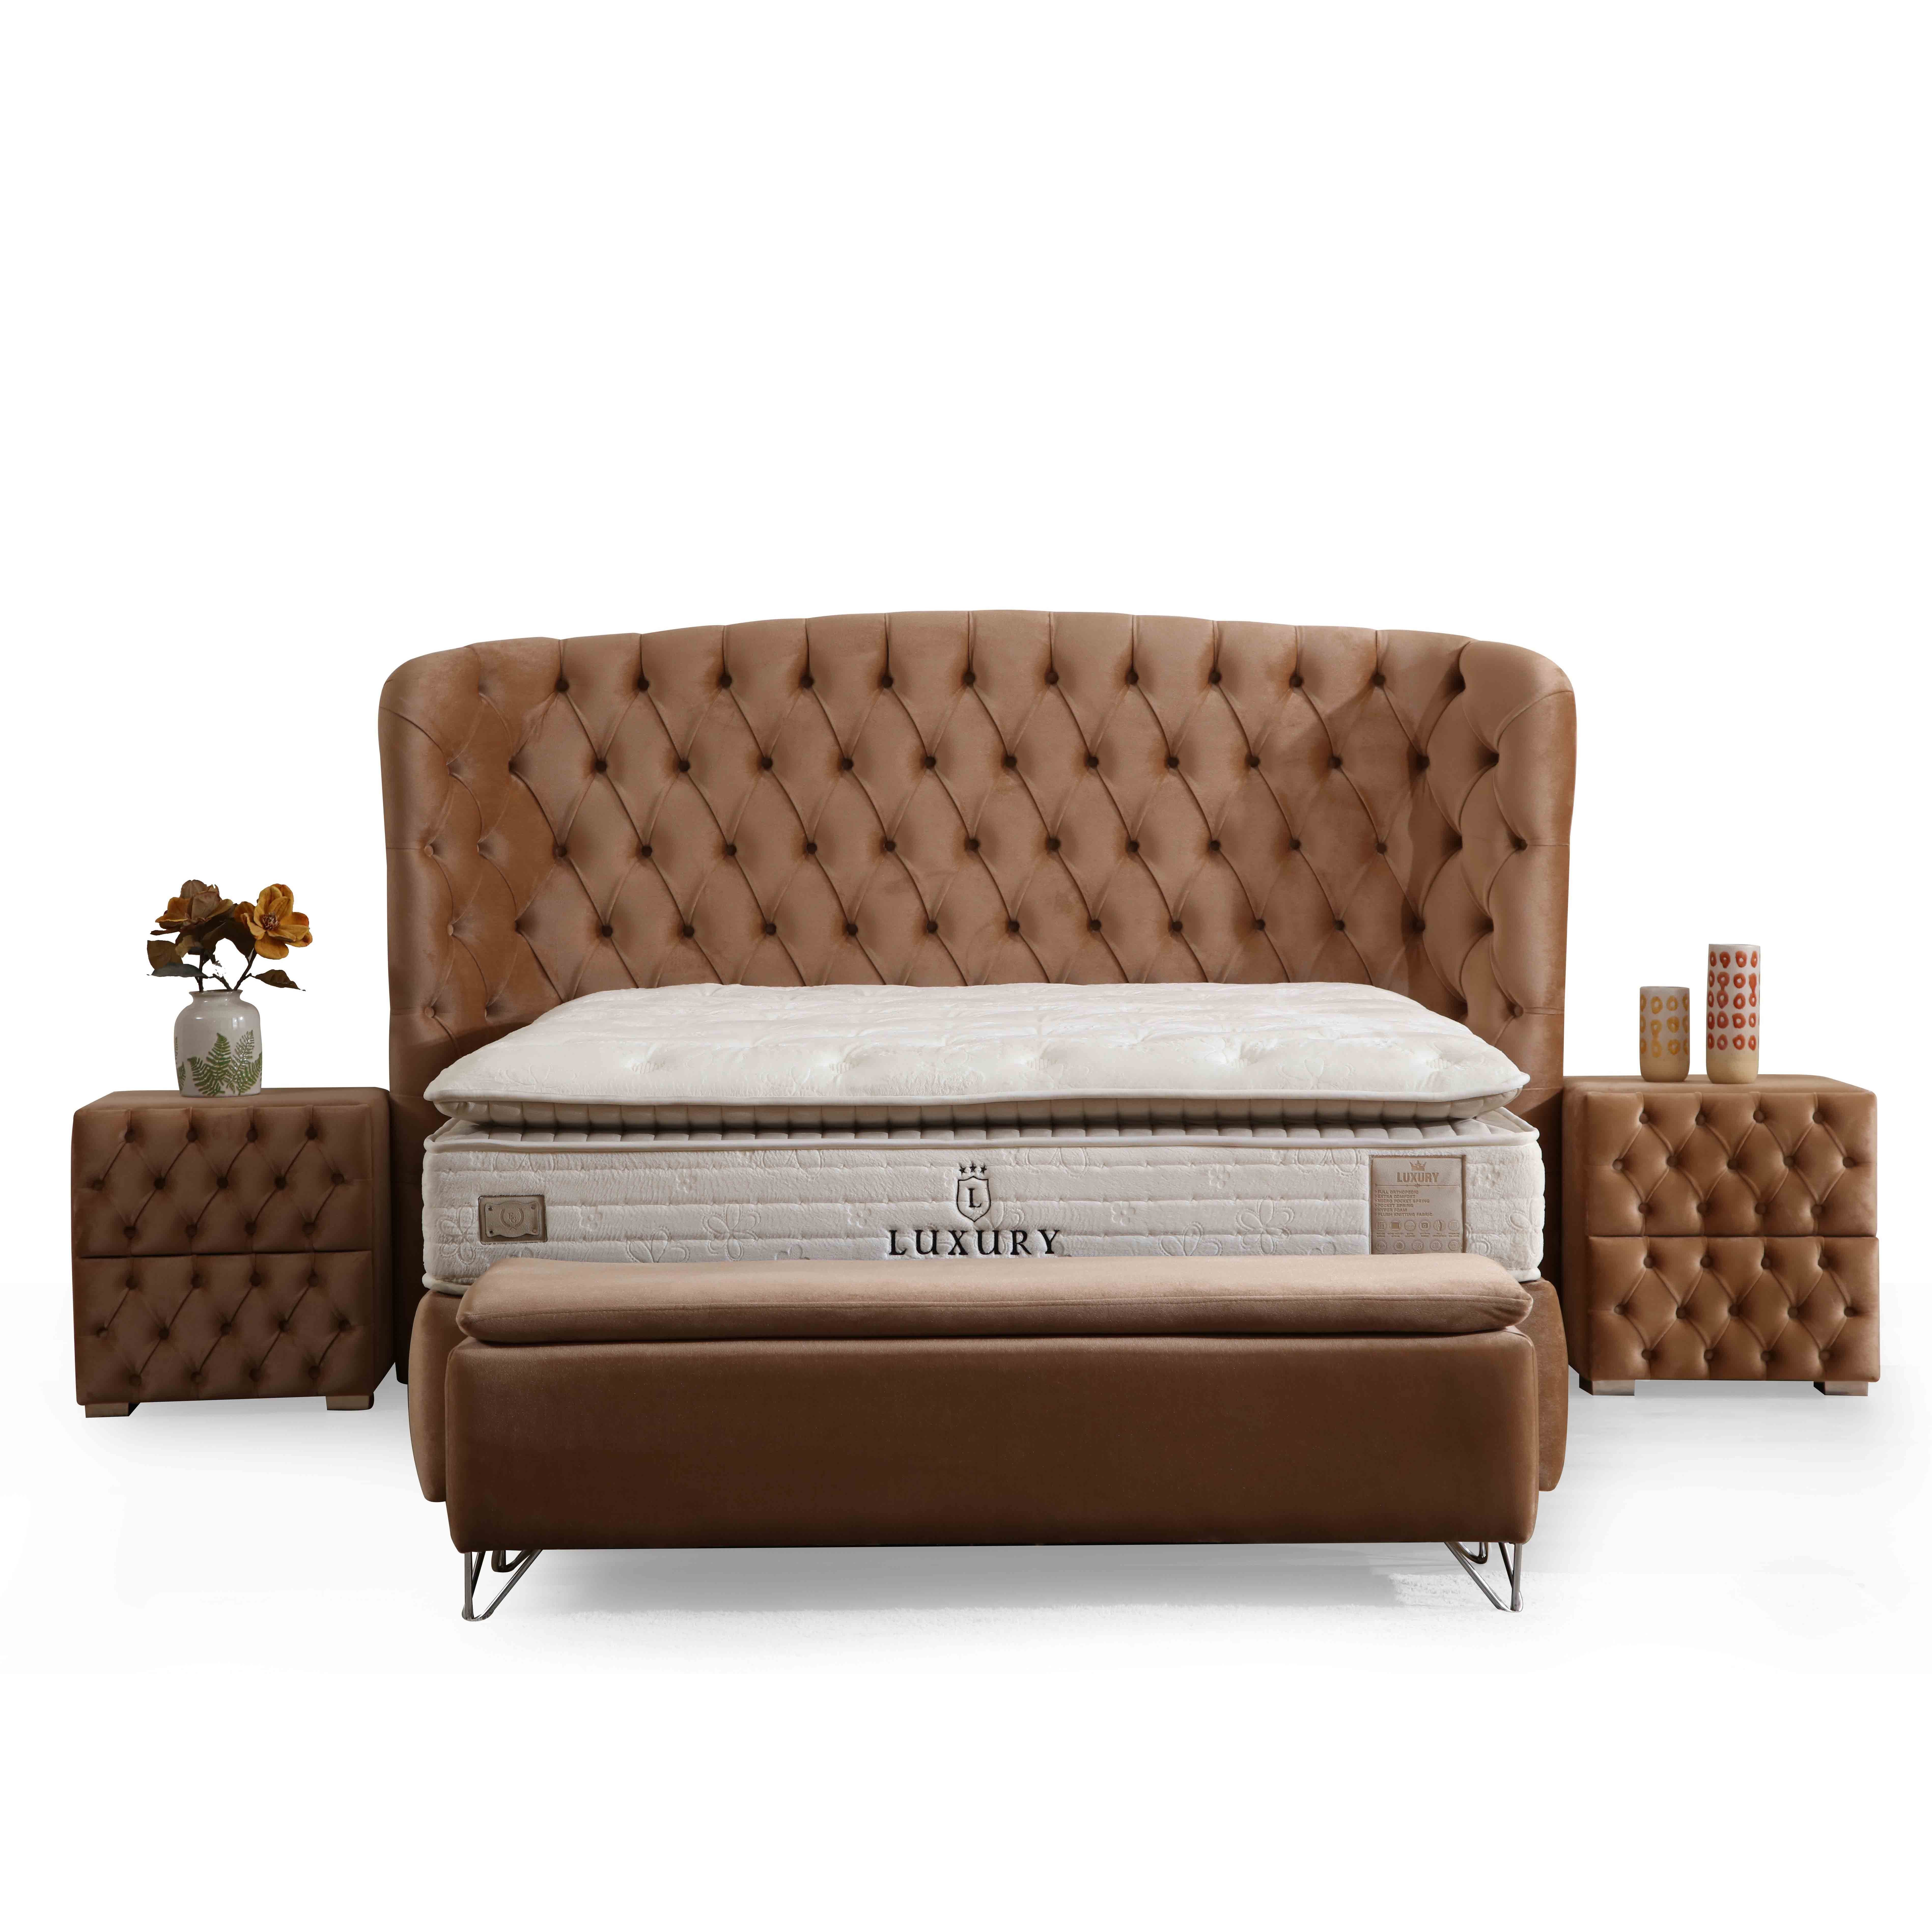 Riva Bed With Storage 140*190